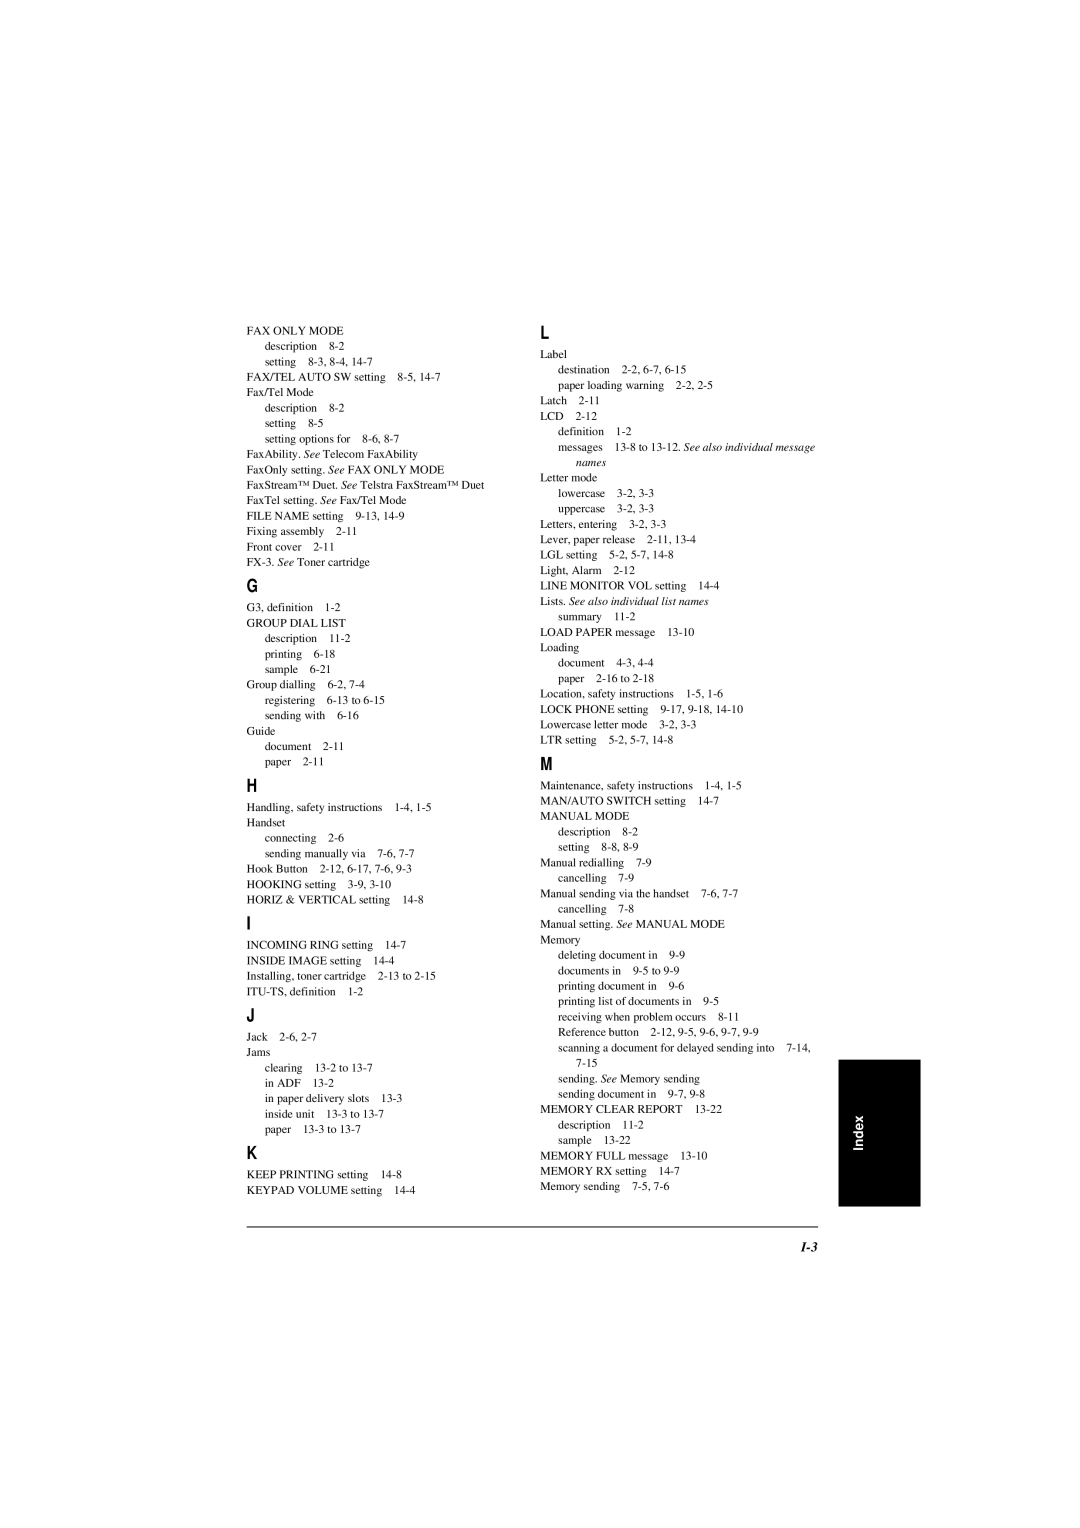 Canon L240, L290 manual Index, Lists. See also individual list names 